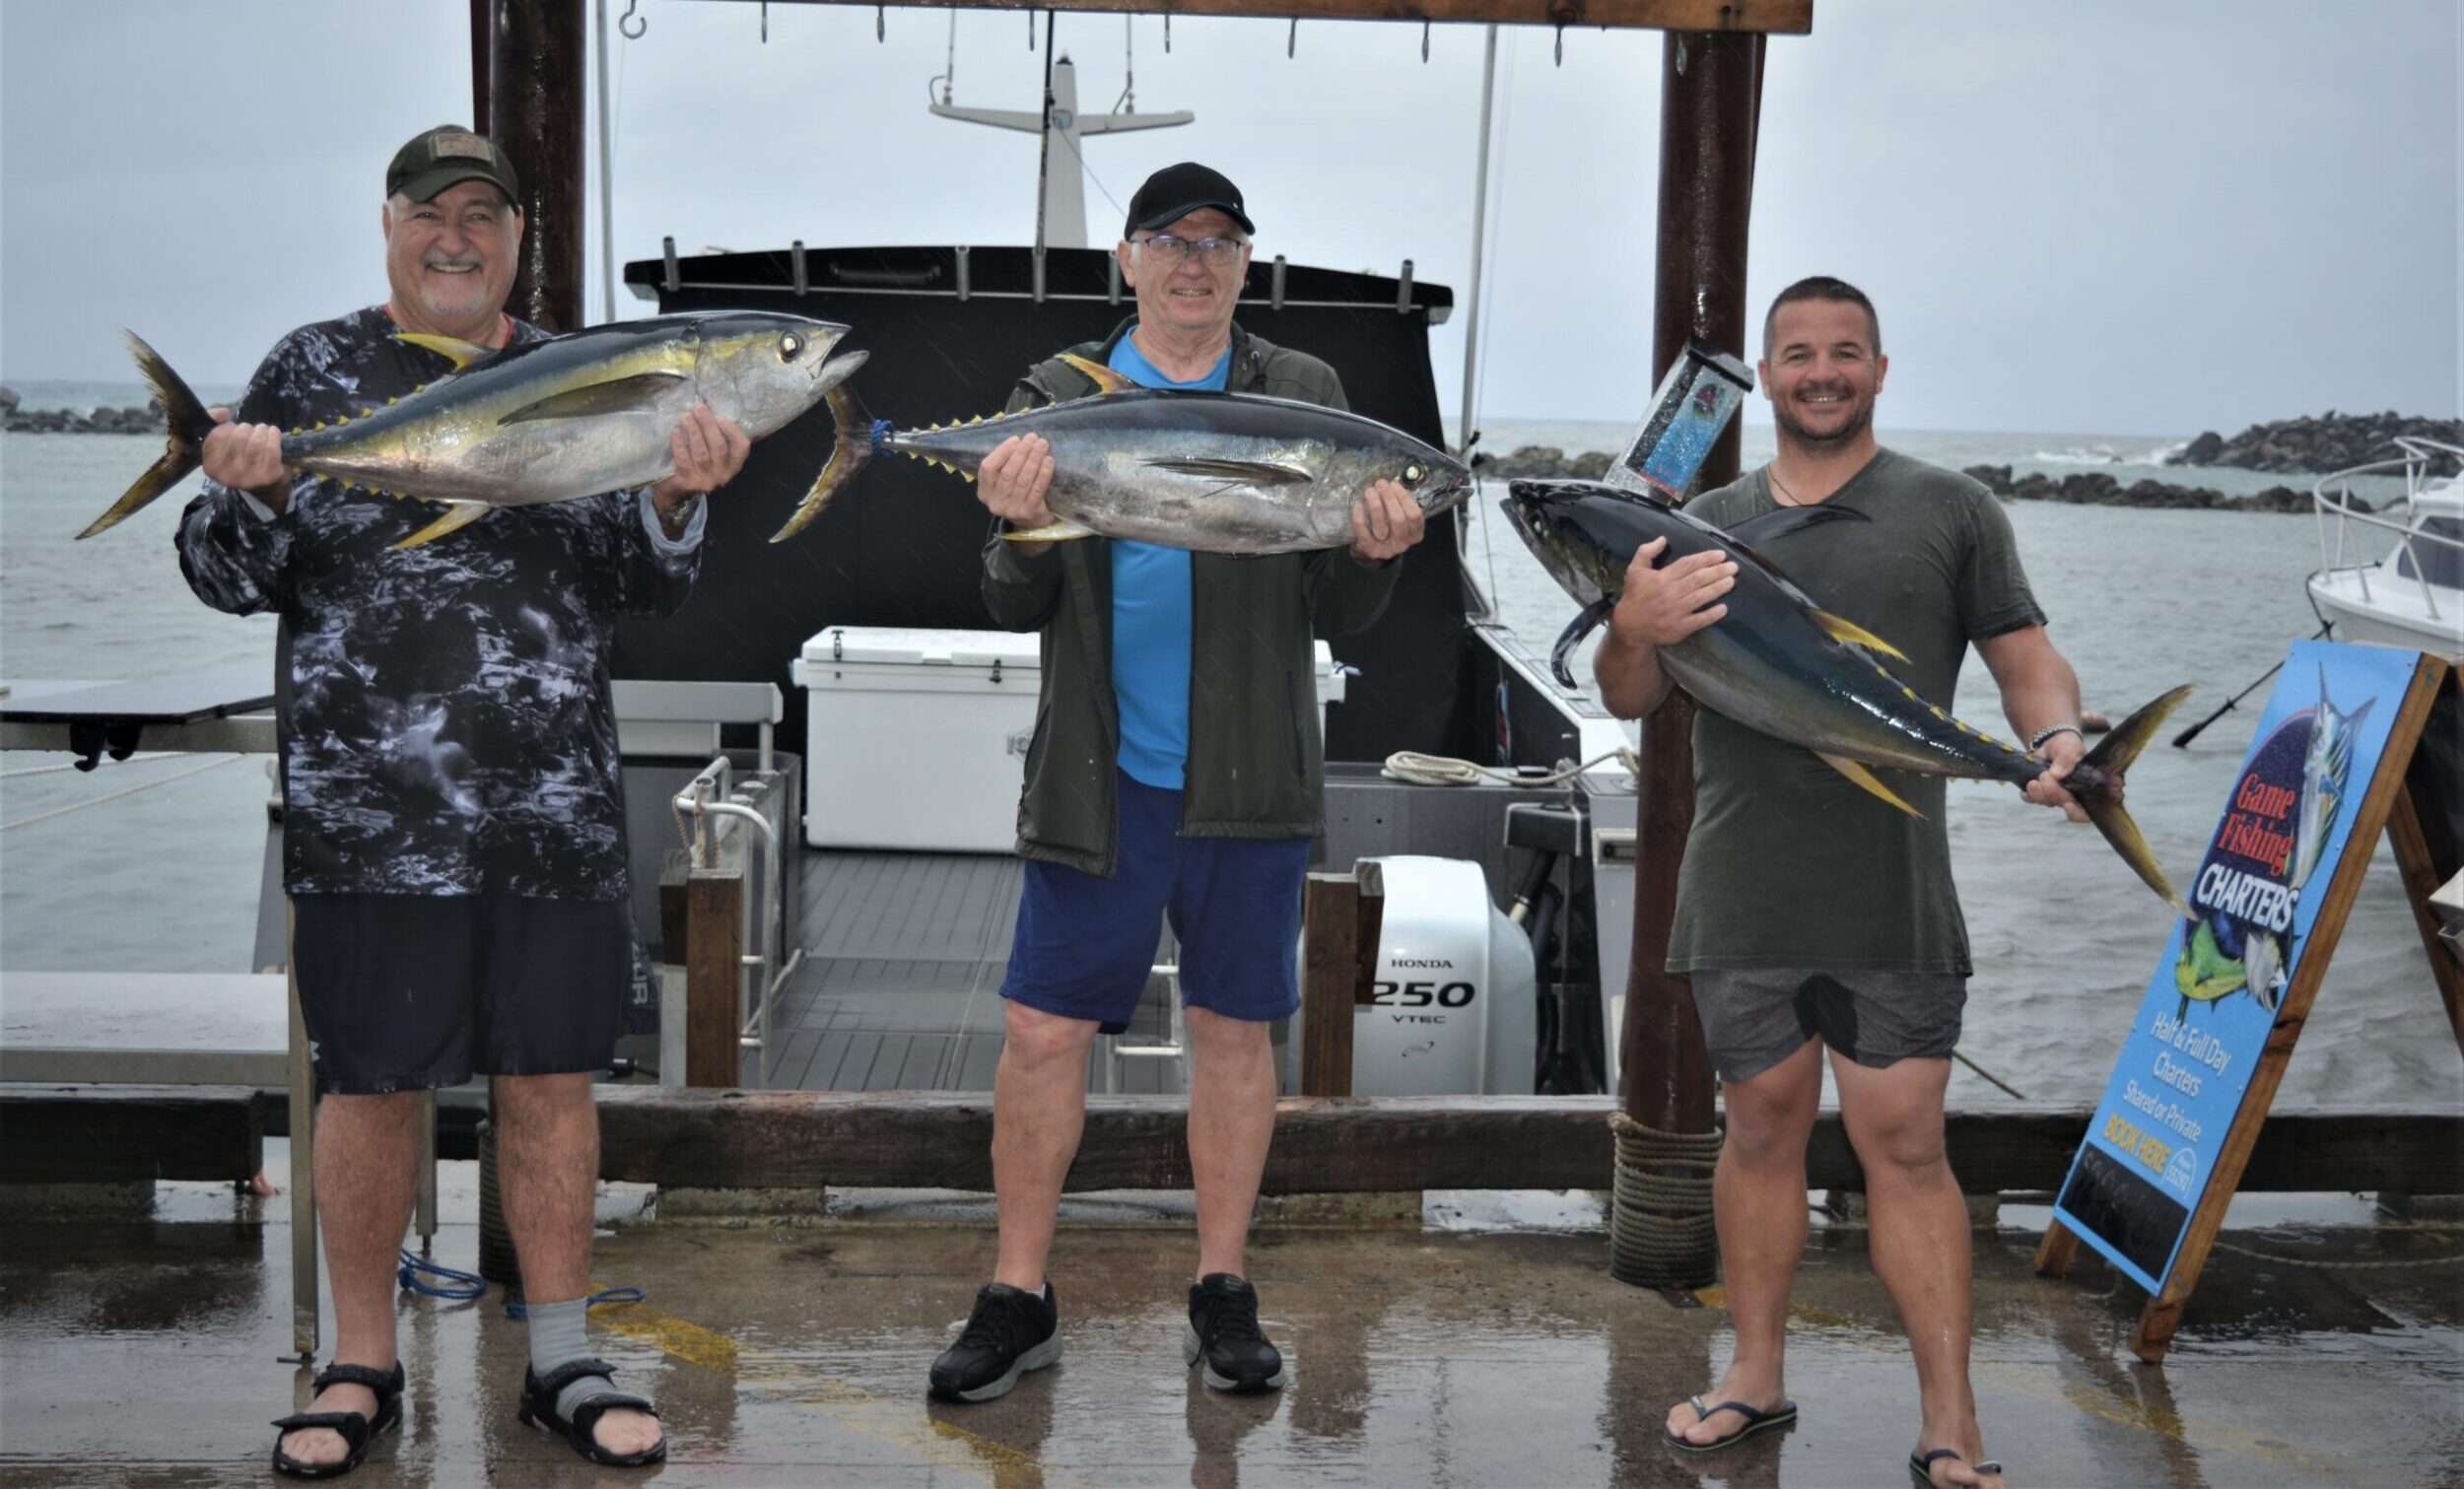 Fishing charter lands good catch – on land and at sea